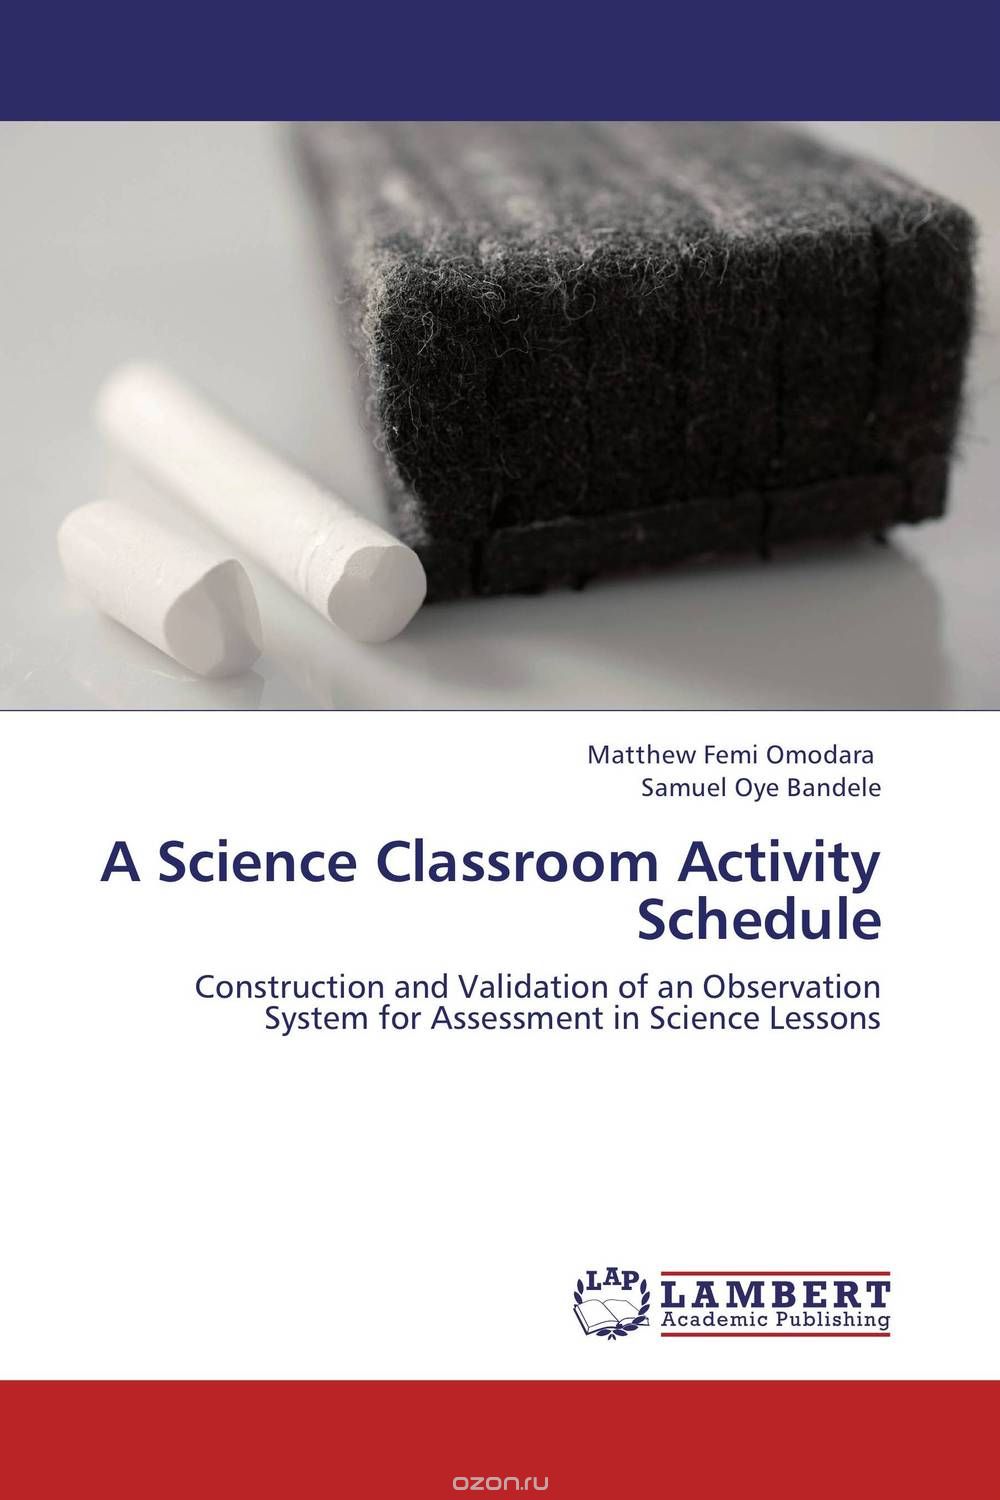 A Science Classroom Activity Schedule